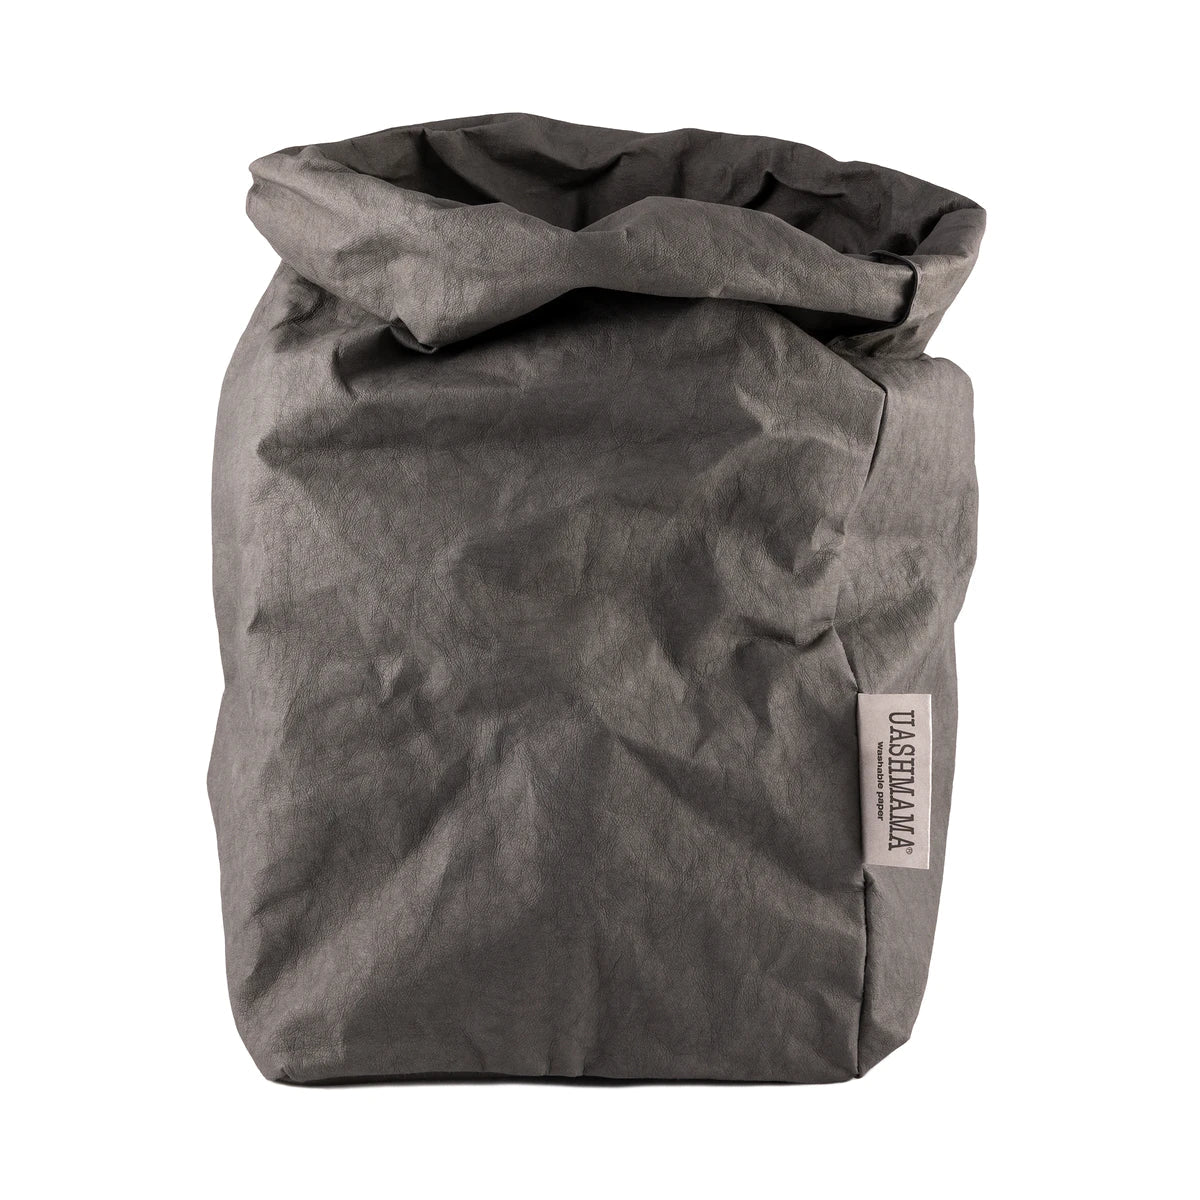 A washable paper bag is shown. The bag is rolled down at the top and features a UASHMAMA logo label on the bottom left corner. The bag pictured is the extra large size in dark grey.